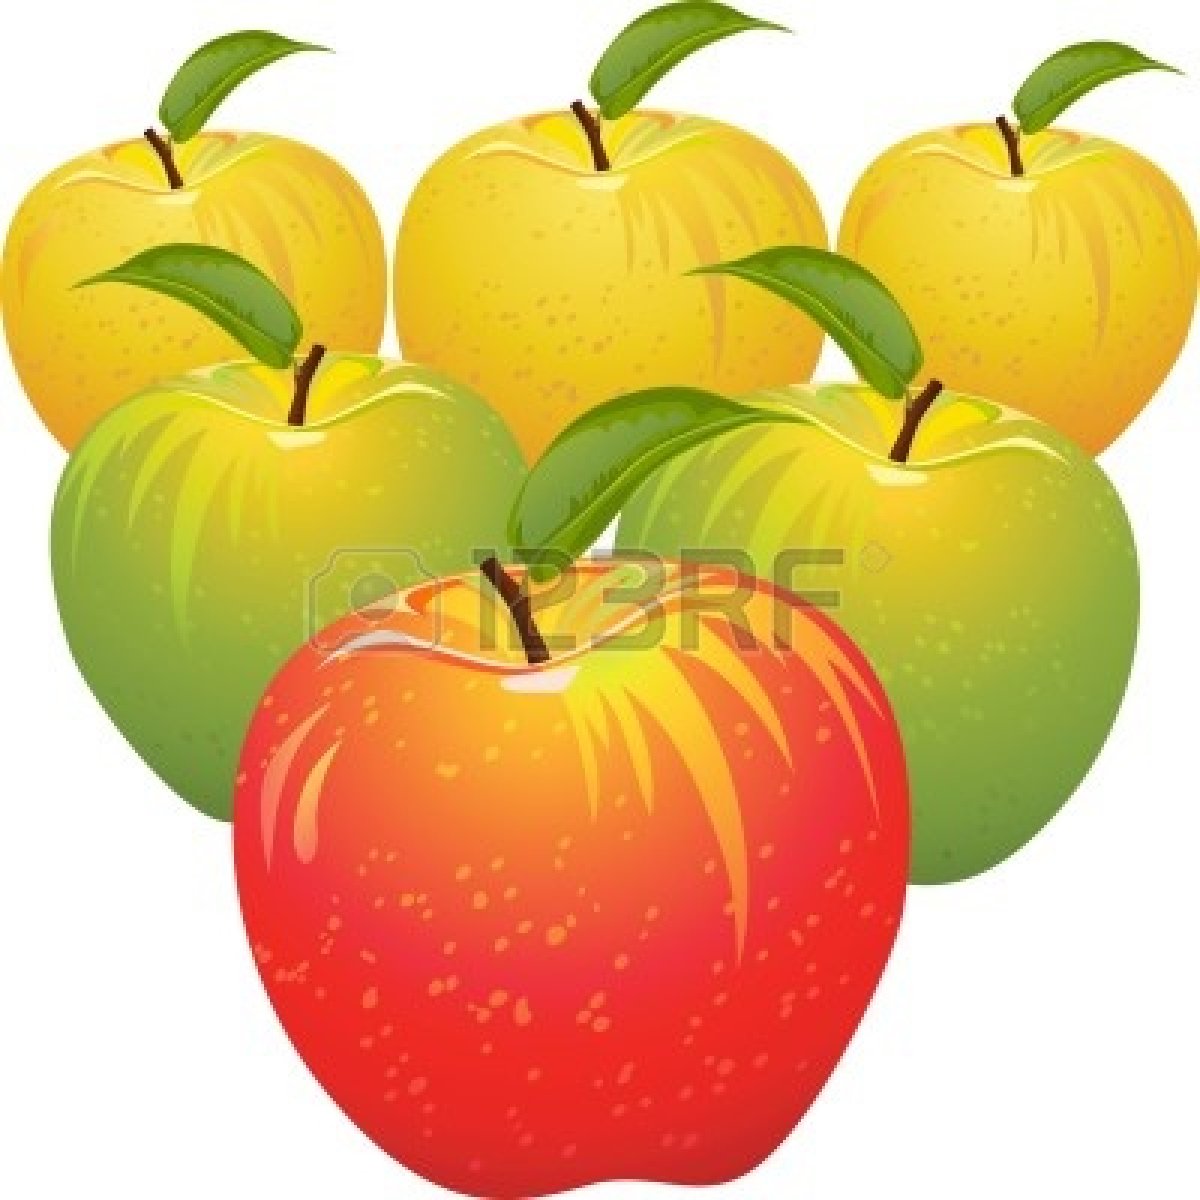 School Apple Clip Art Black And White Apple Cliparts Juicy Red Apple